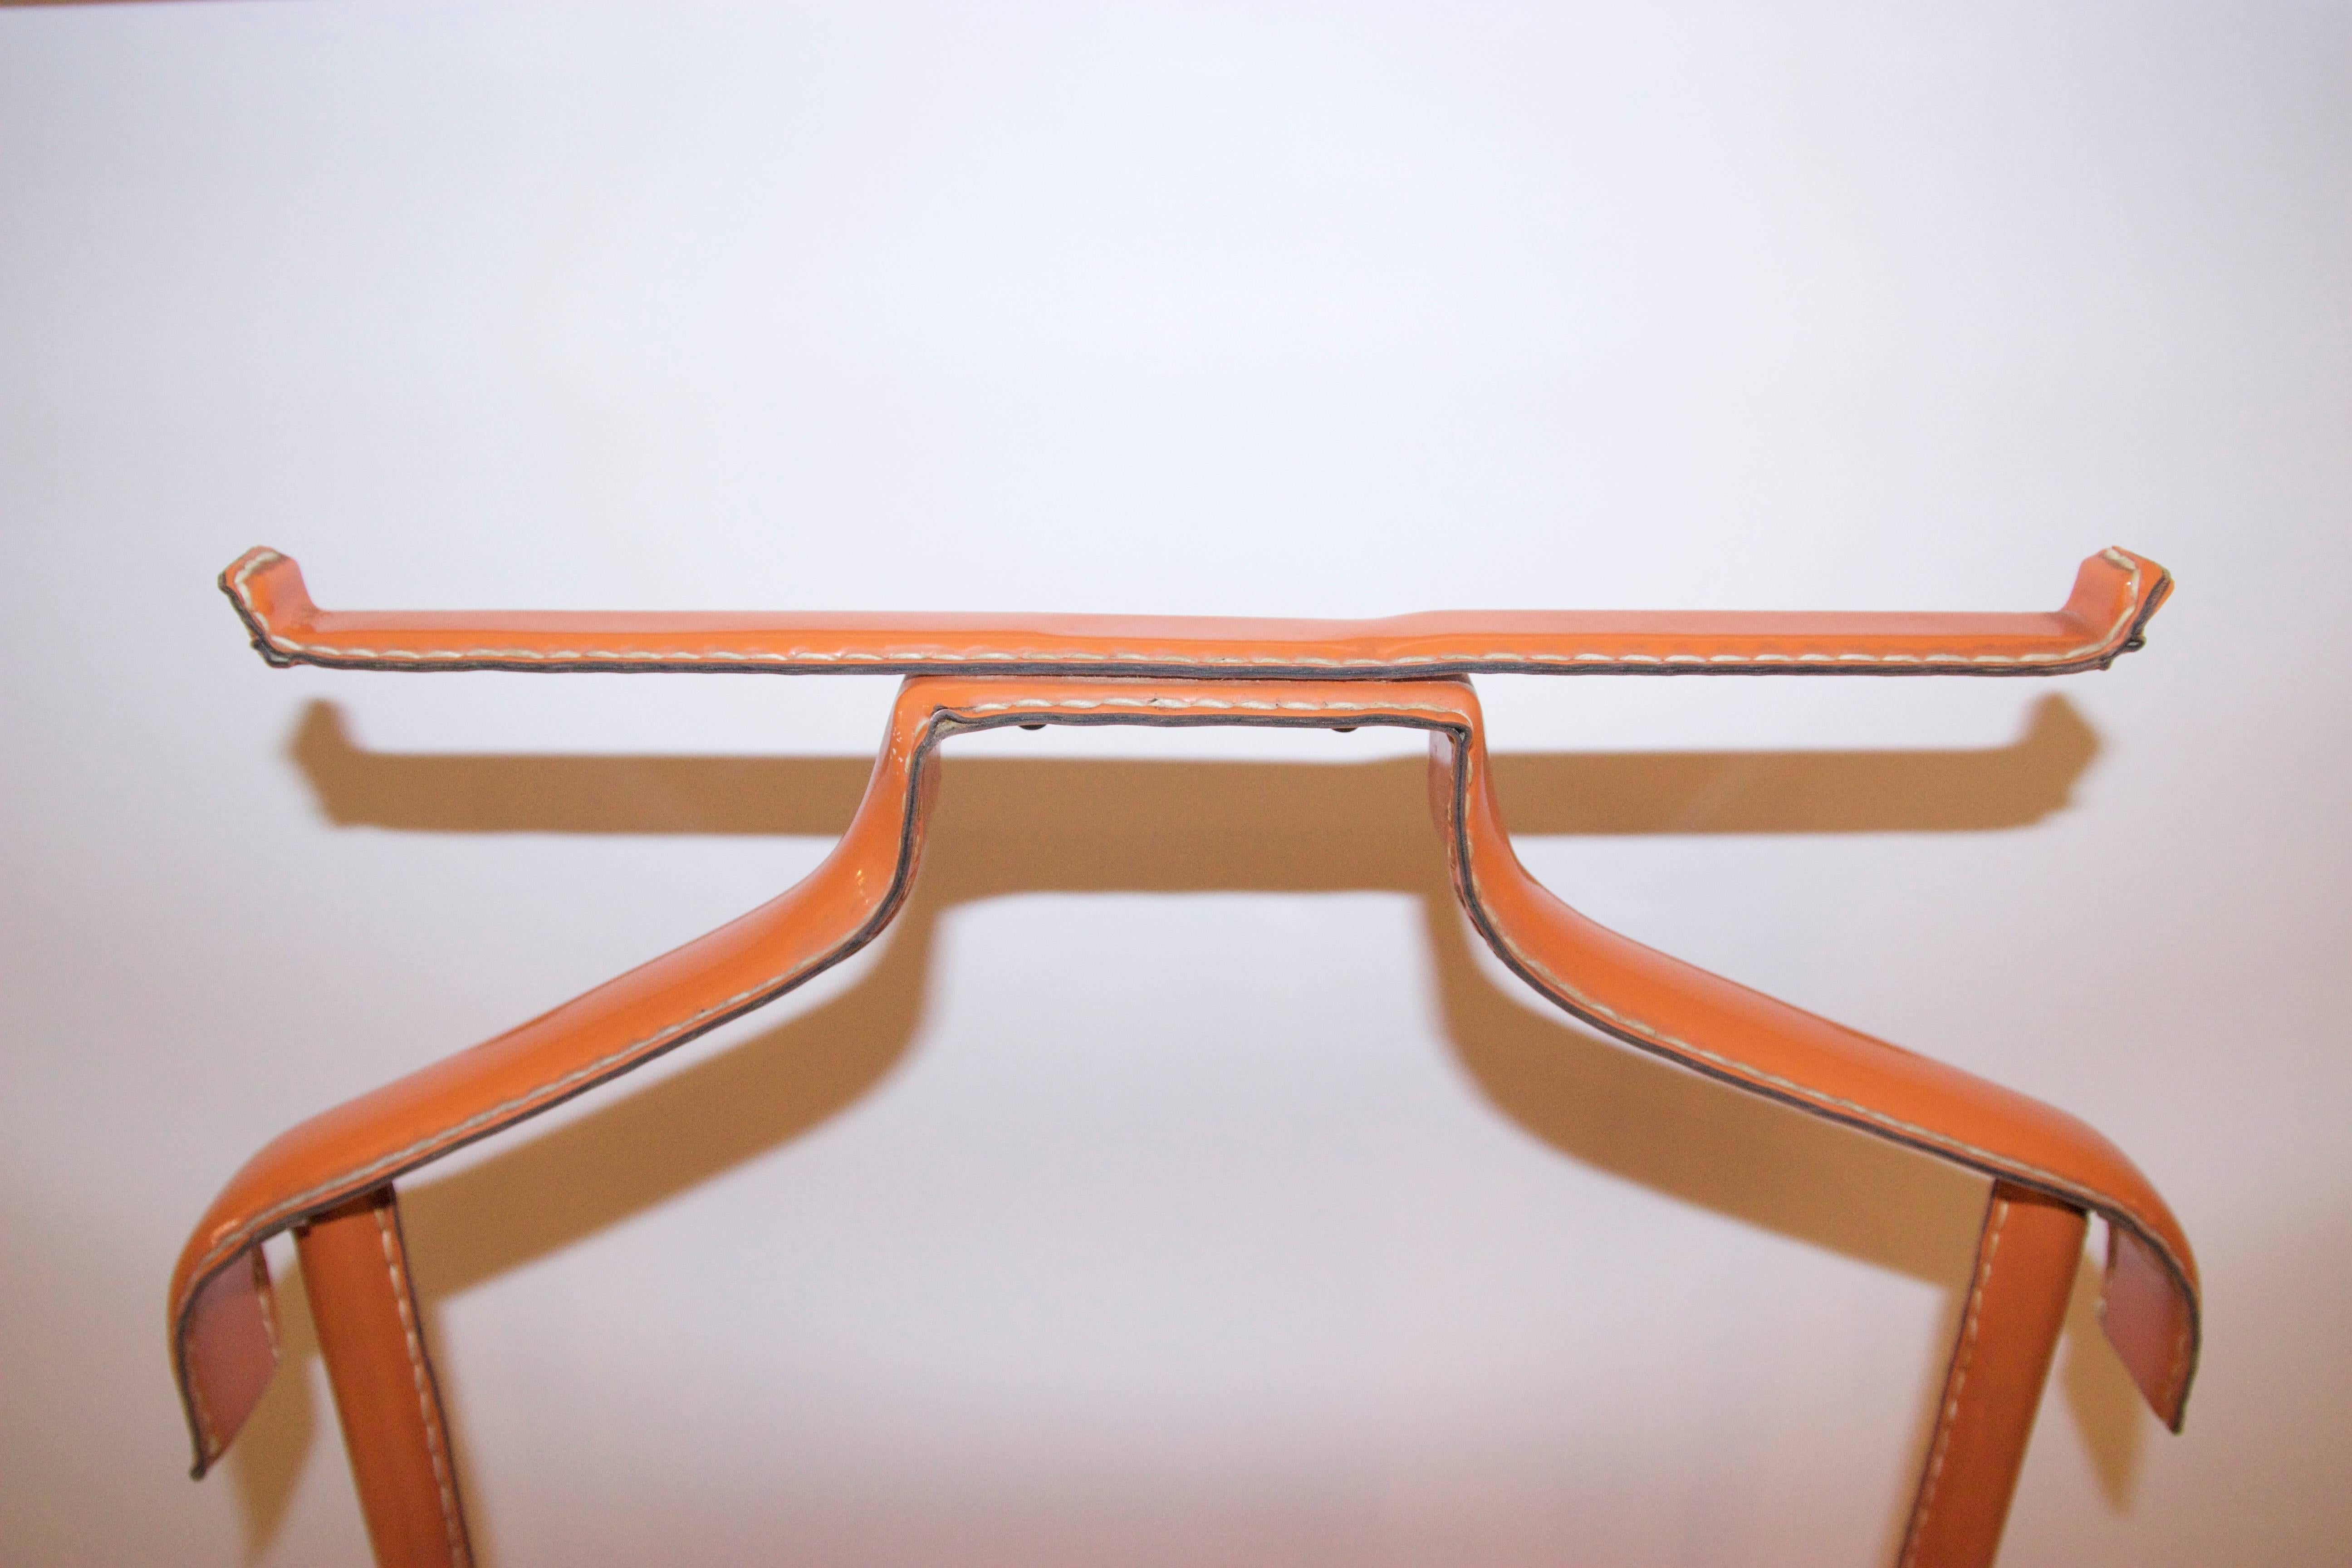 Jacques Adnet for Hermès, valet of night,
Orange Hermès faux leather and iron structure,
circa 1960, France.
Measures: Height 1m30, width 42 cm, depth 34 cm.